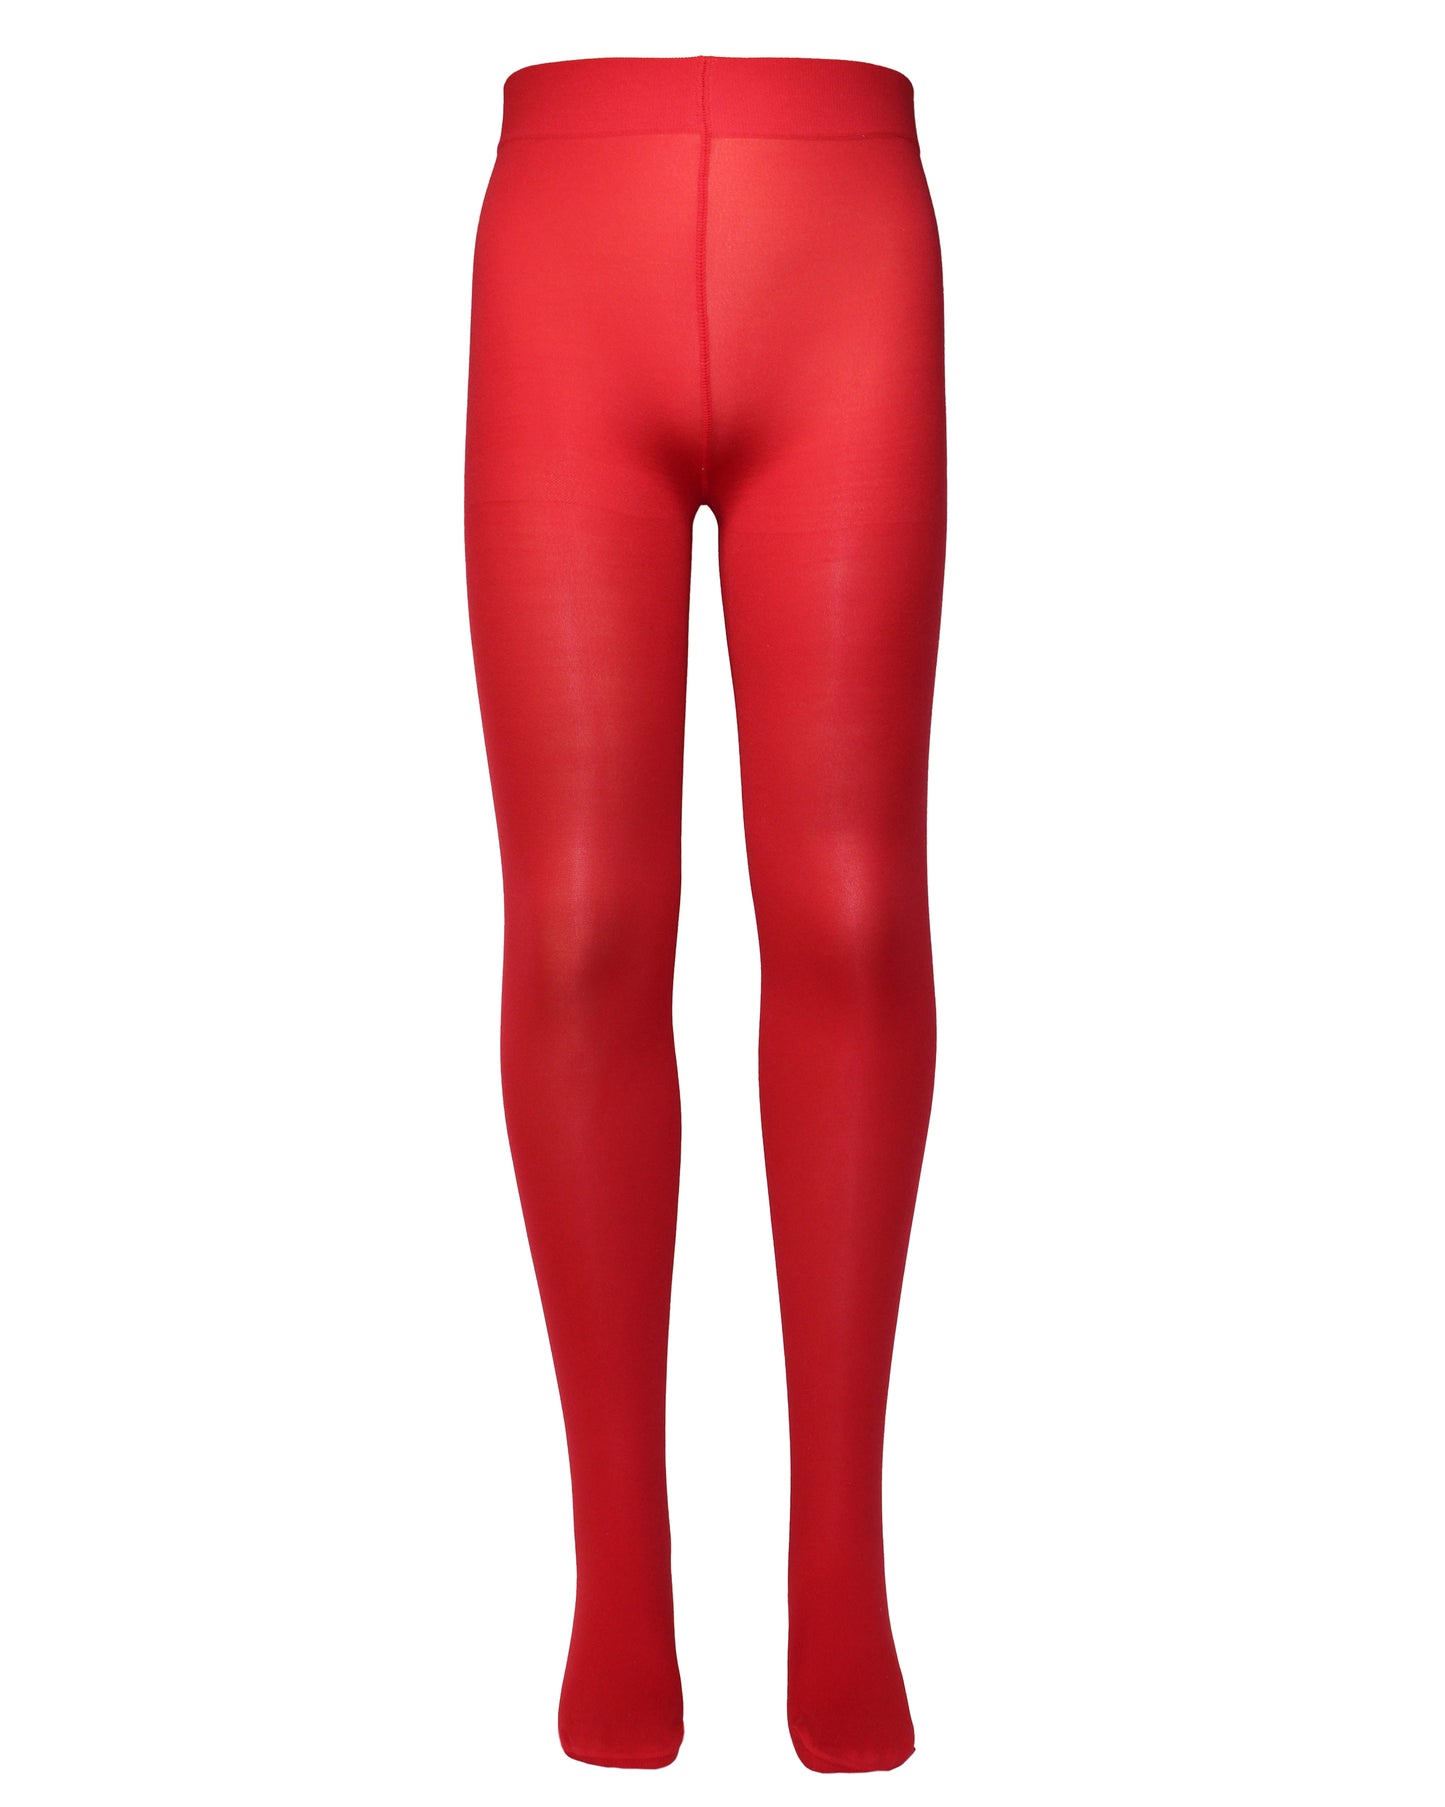 Omsa MiniVelour 40 Tights - Bright red soft and matte opaque plain kid's tights with flat seams, deep waistband and reinforced toes.